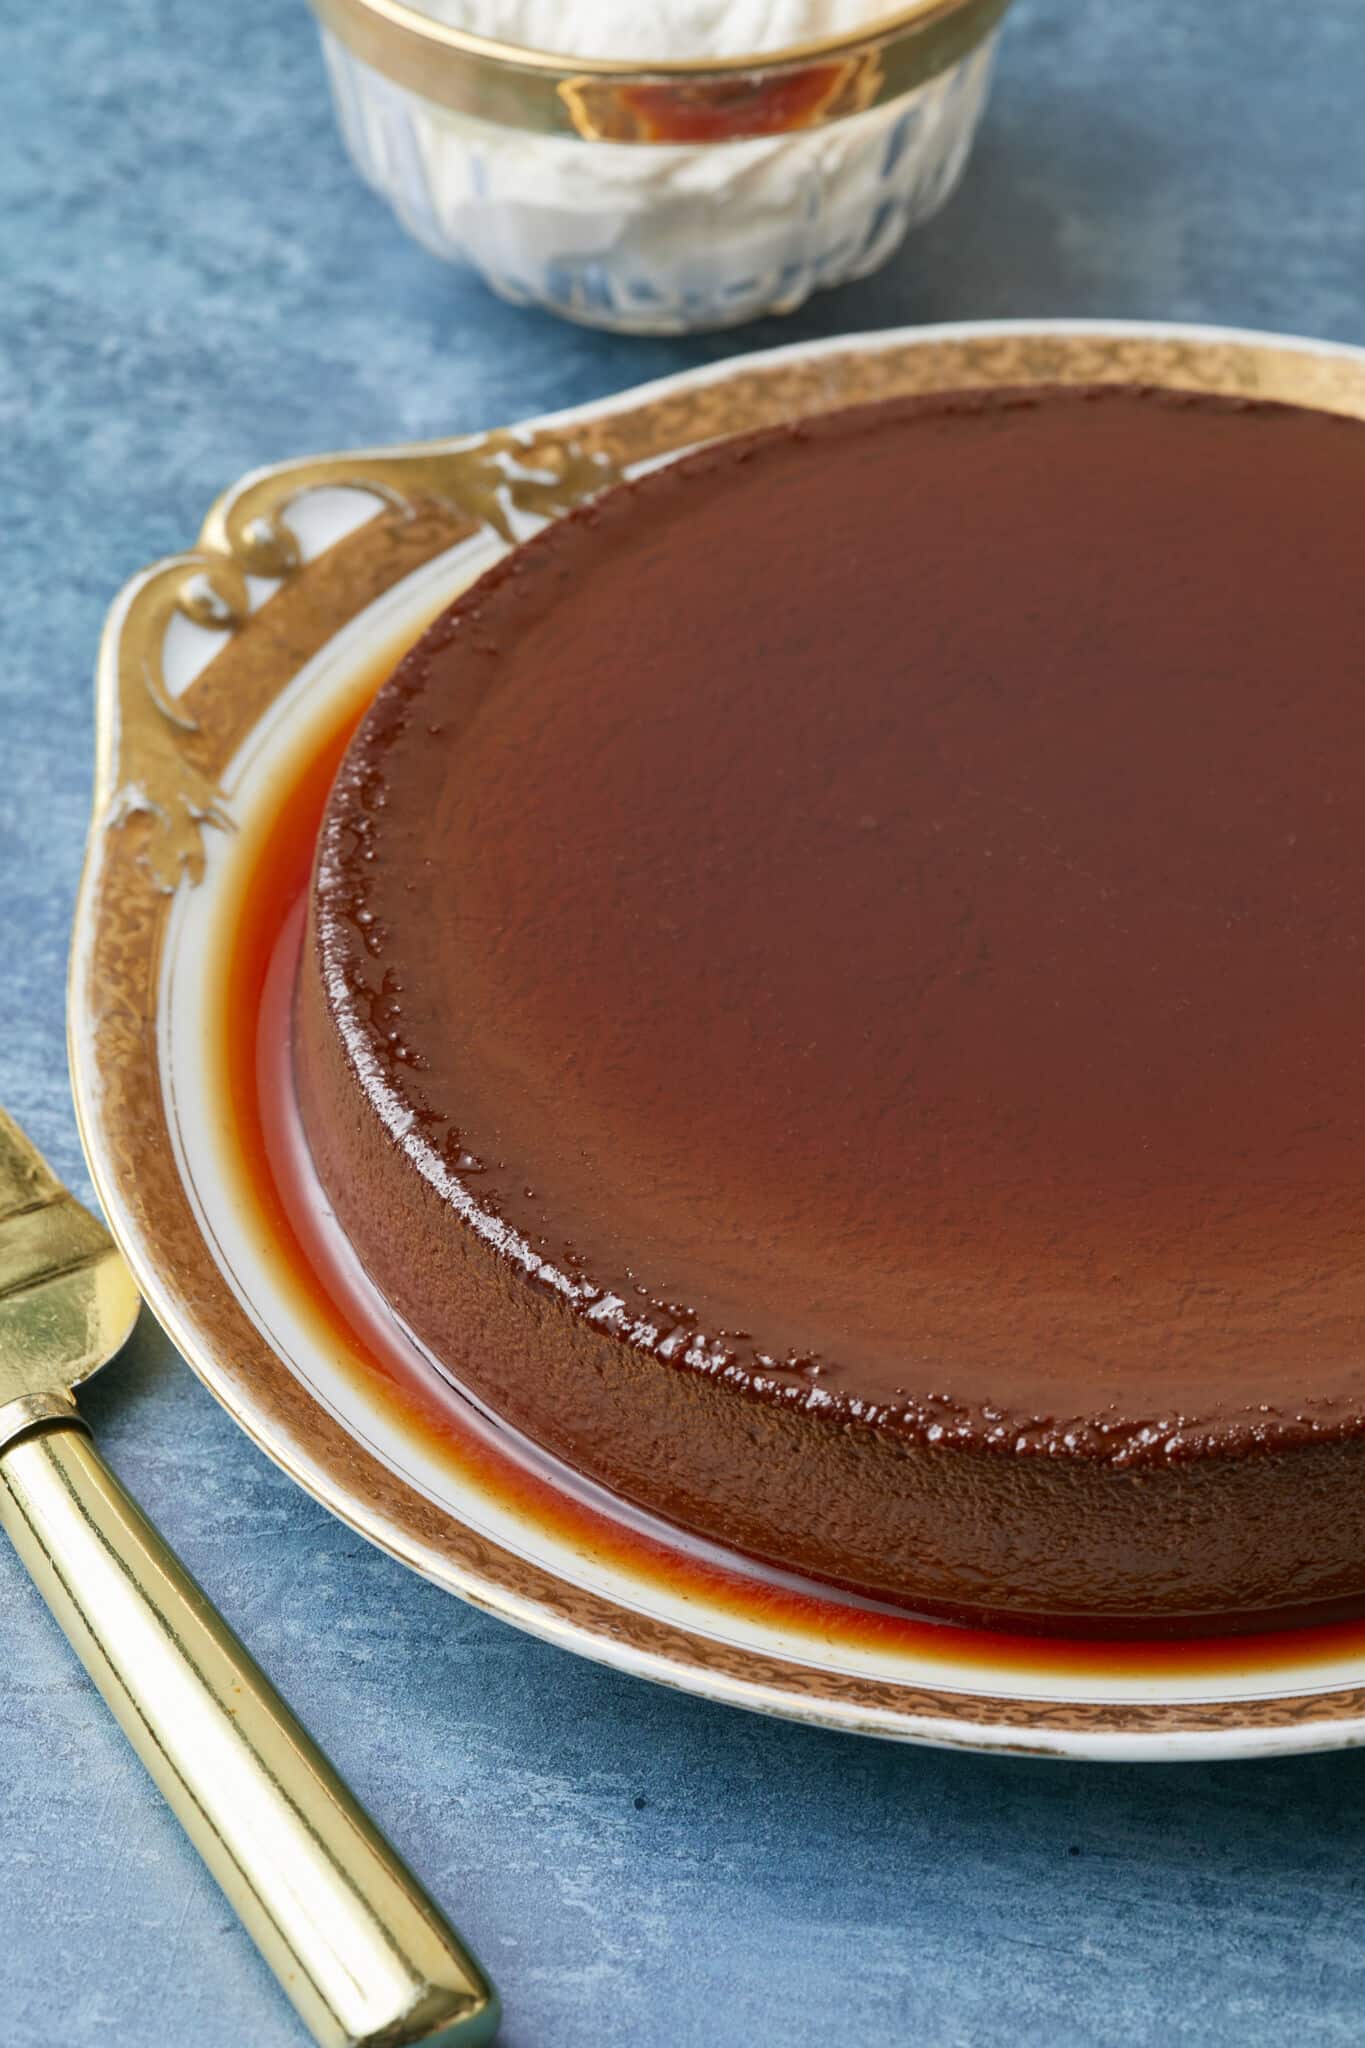 Mexican Chocolate Flan is served on a golden rim platter. The close-up shot shows that it is silky smooth in deep chocolate color and covered with a thin layer of caramel. 